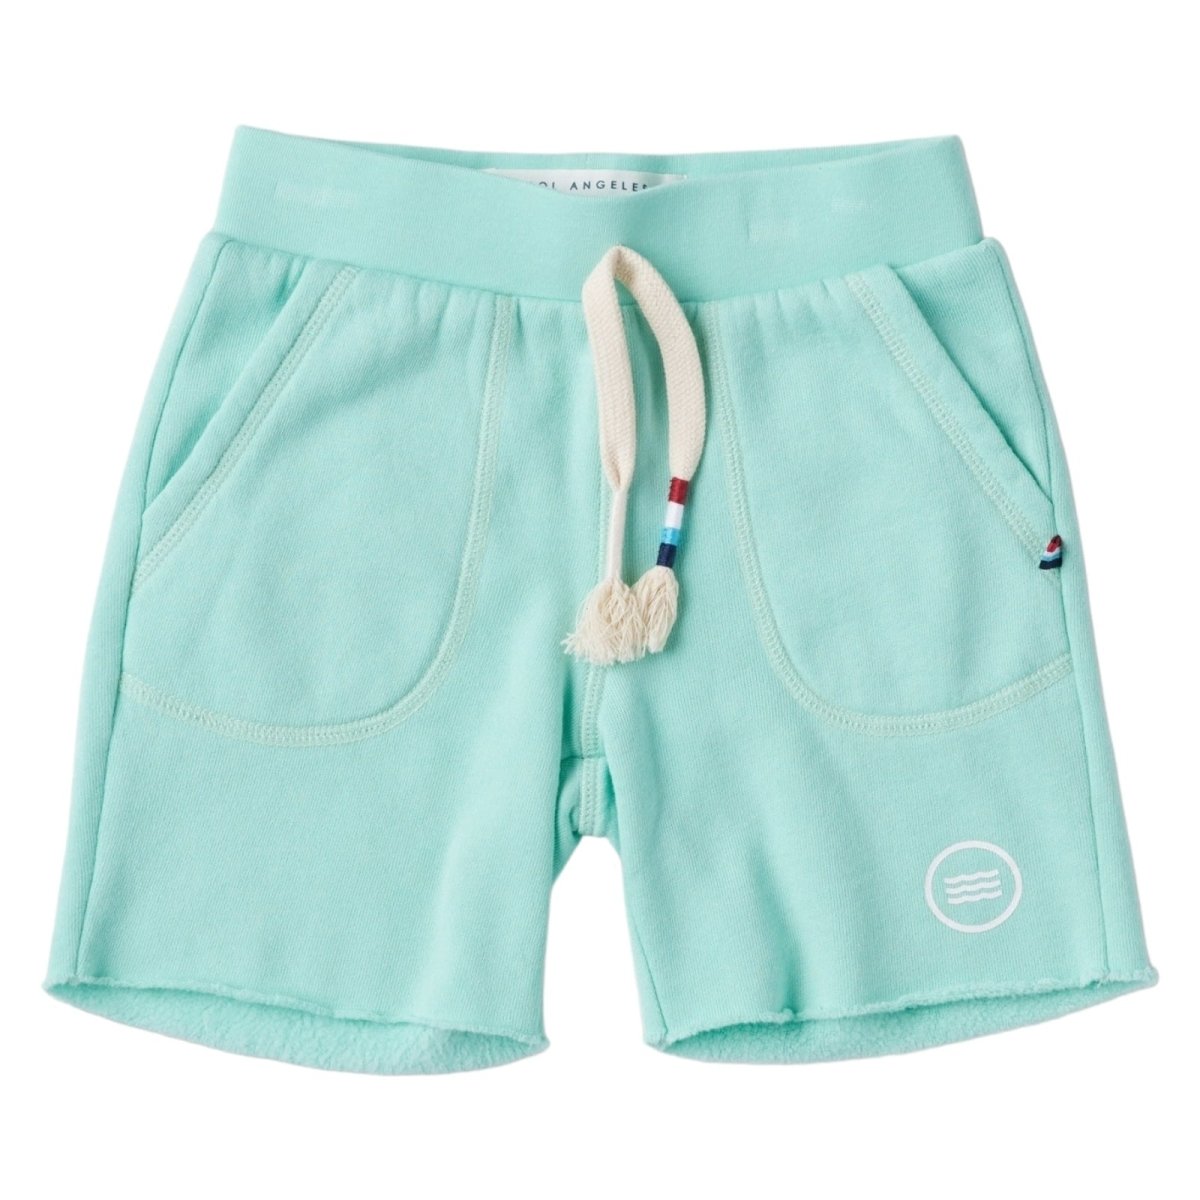 PALM WAVES SHORTS - SOL ANGELES KIDS